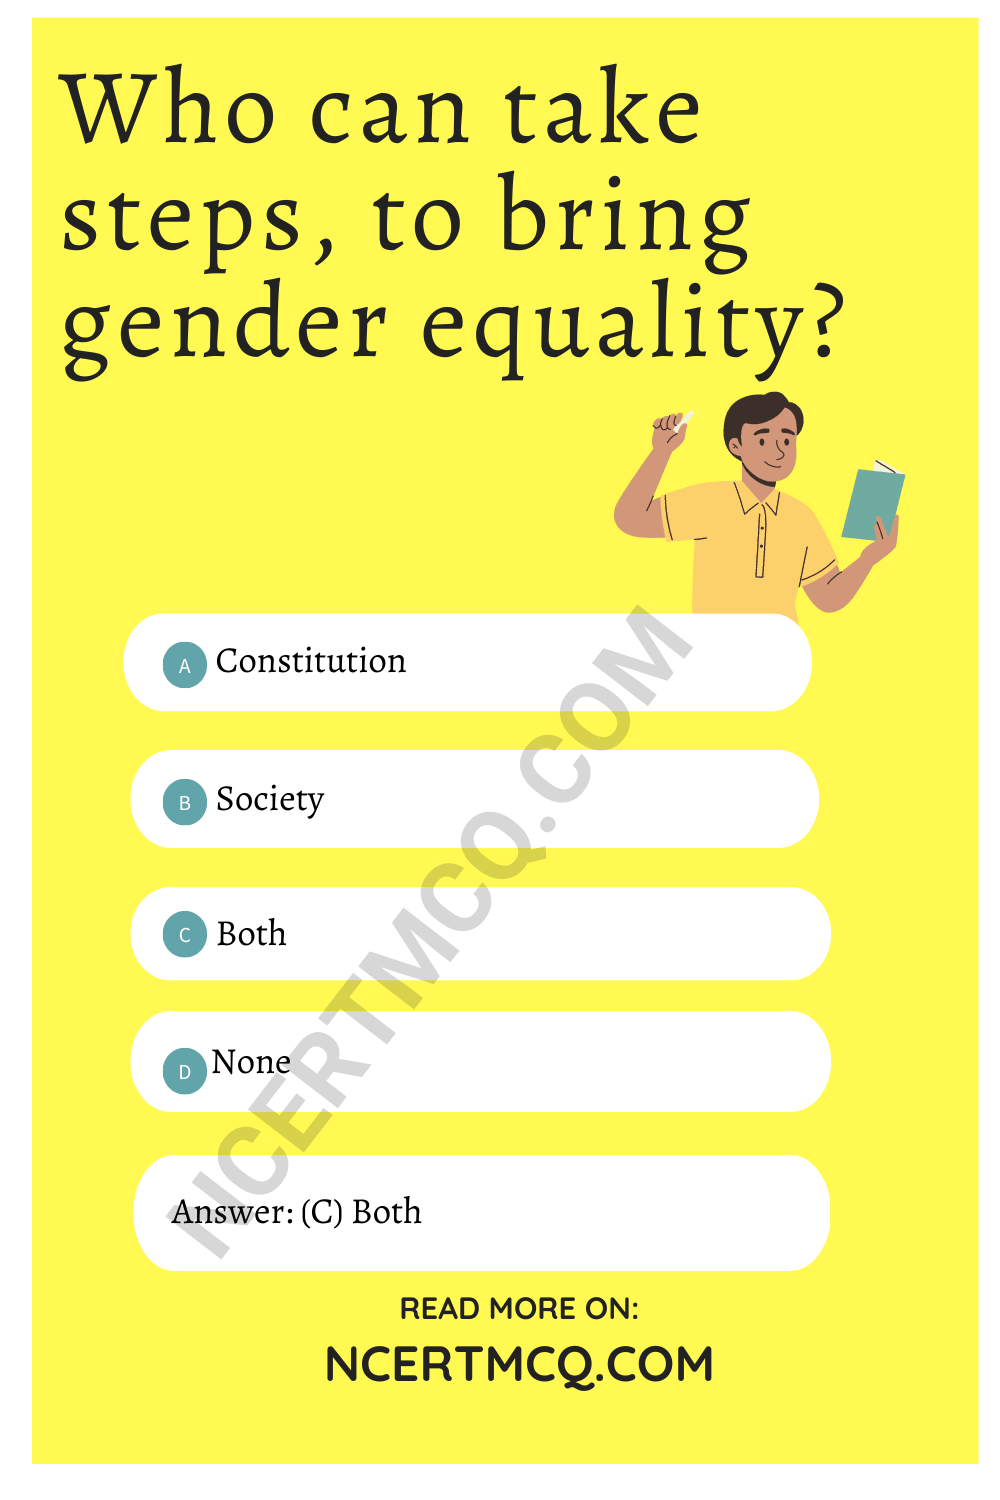 Who can take steps, to bring gender equality?